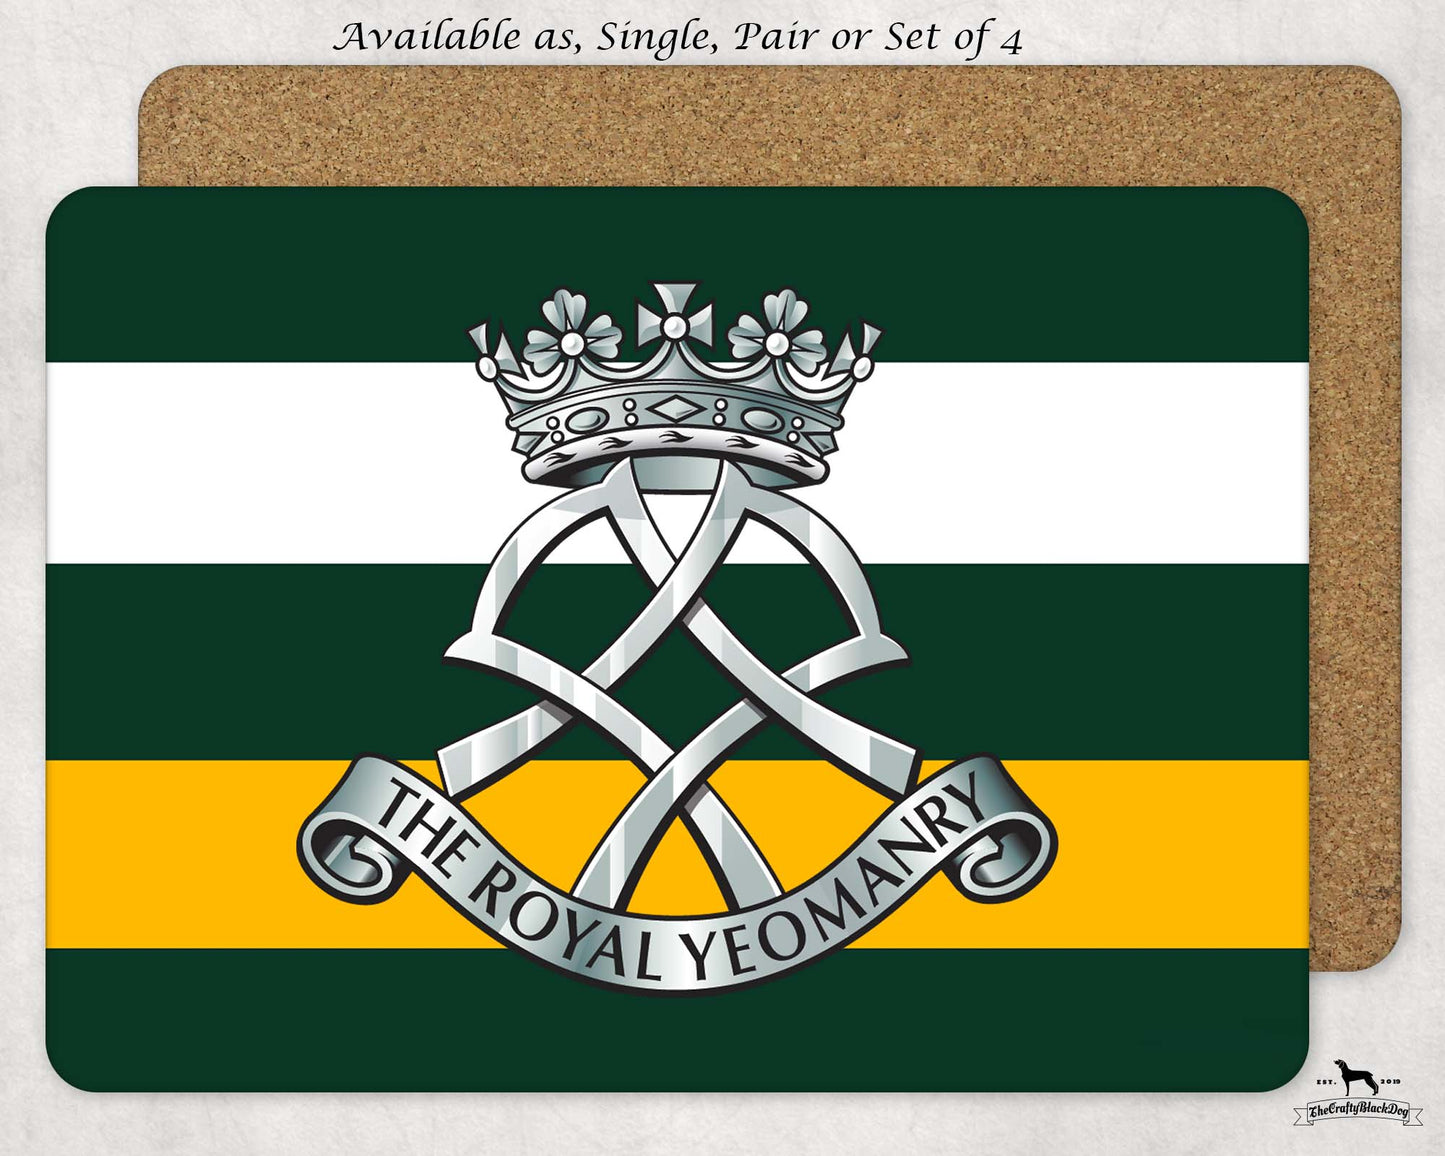 The Royal Yeomanry - Placemat(s)